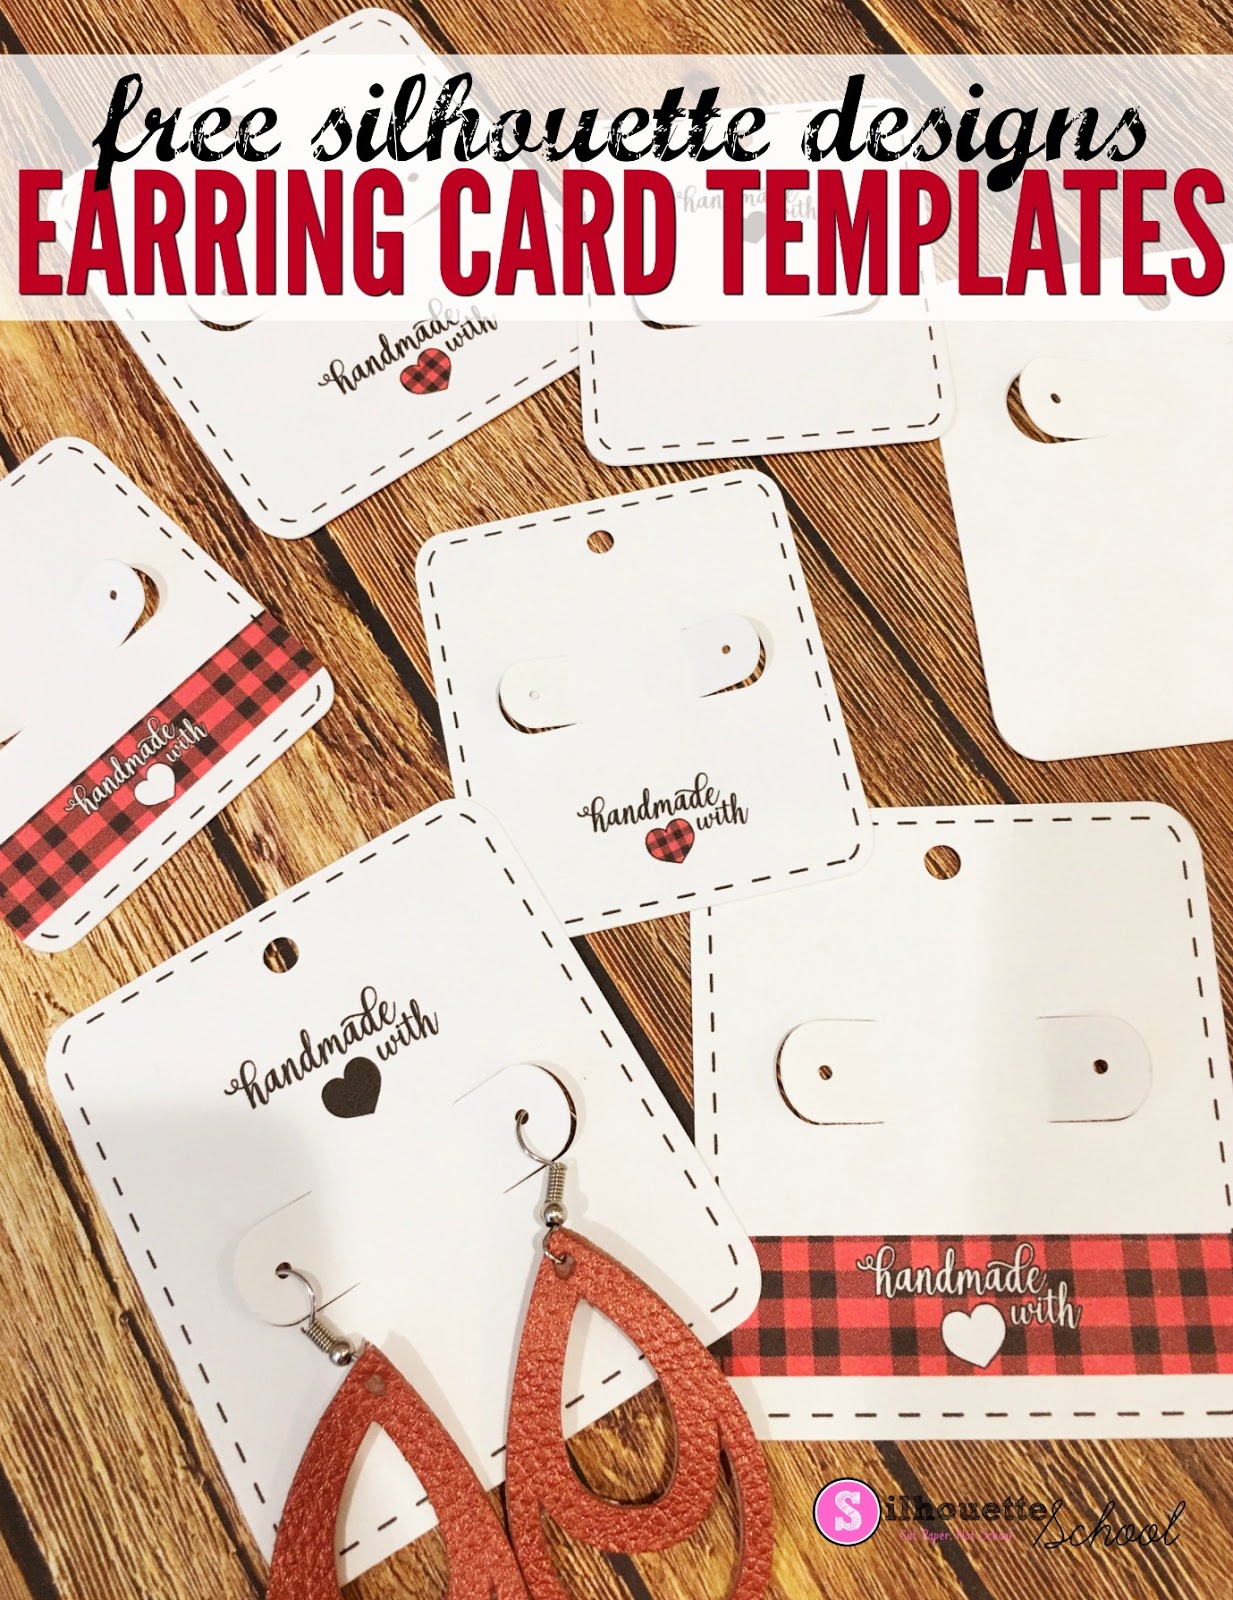 Free Silhouette Earring Card Templates (Set of 21) - Silhouette School Throughout Silhouette Cameo Card Templates